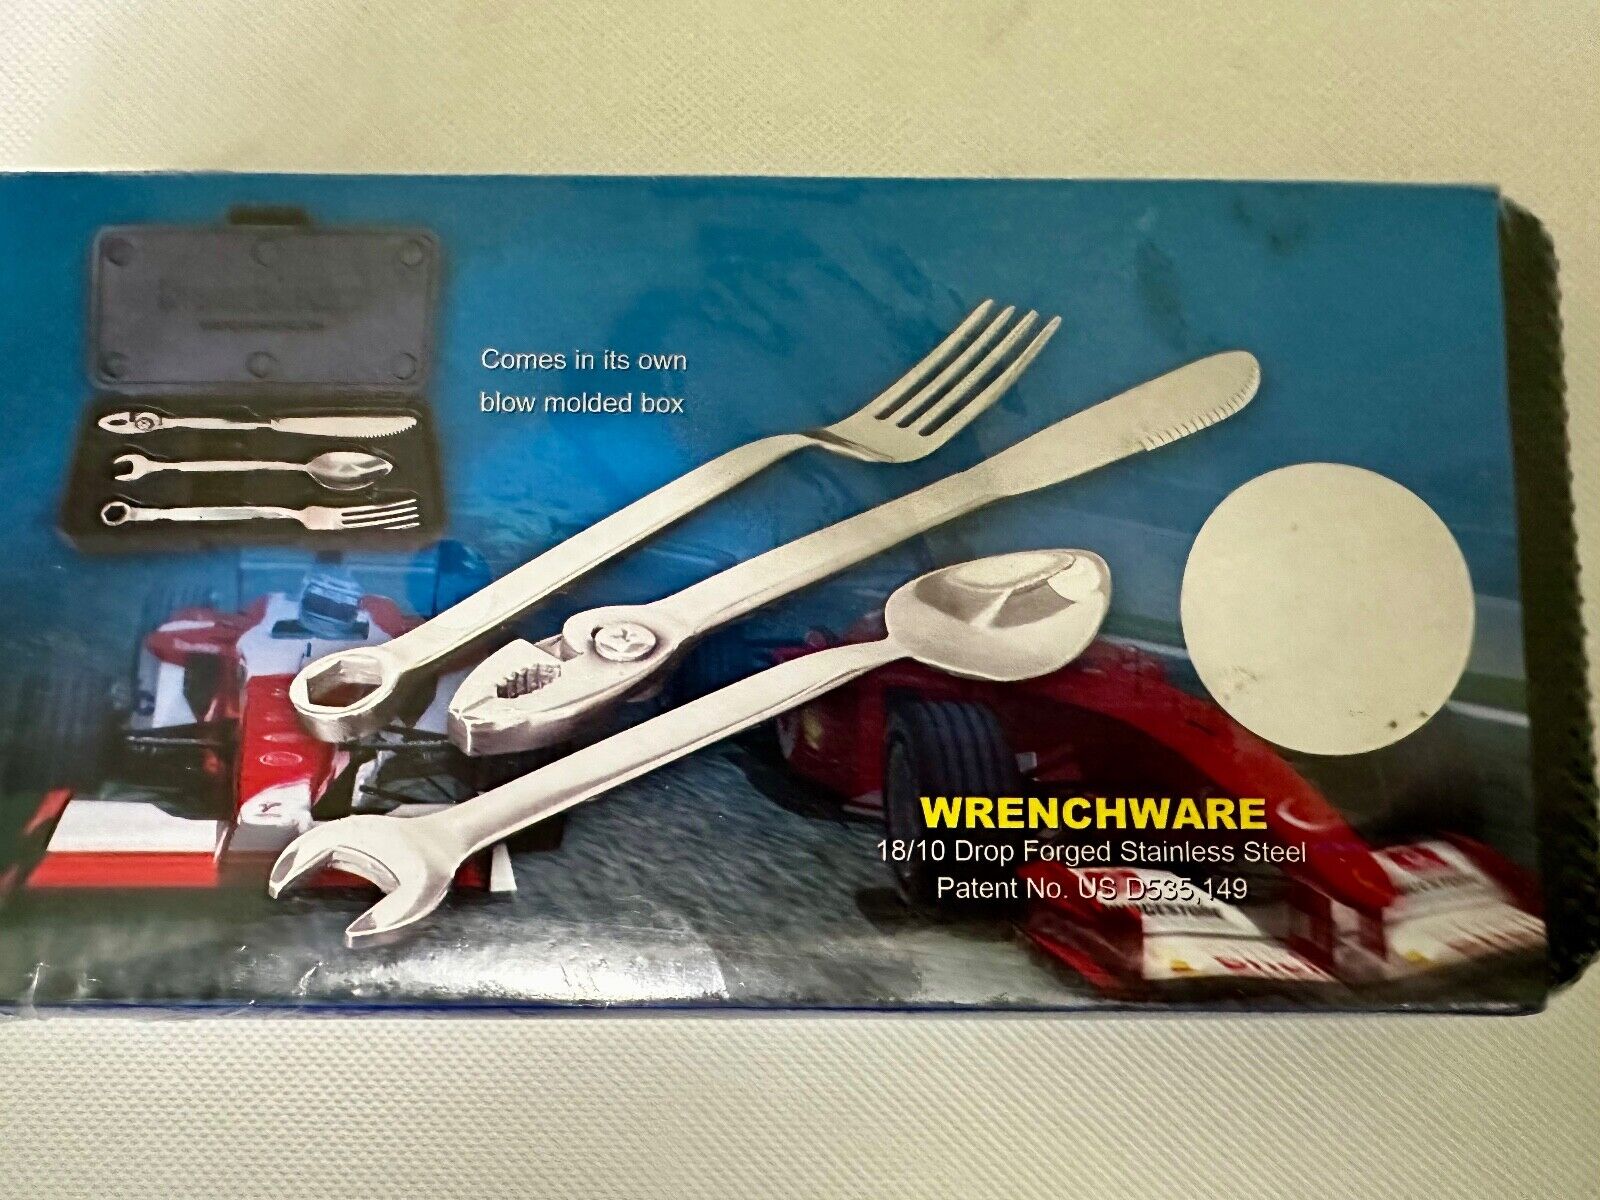 Wrenchware Flatware Set Stainless Steel New in Box